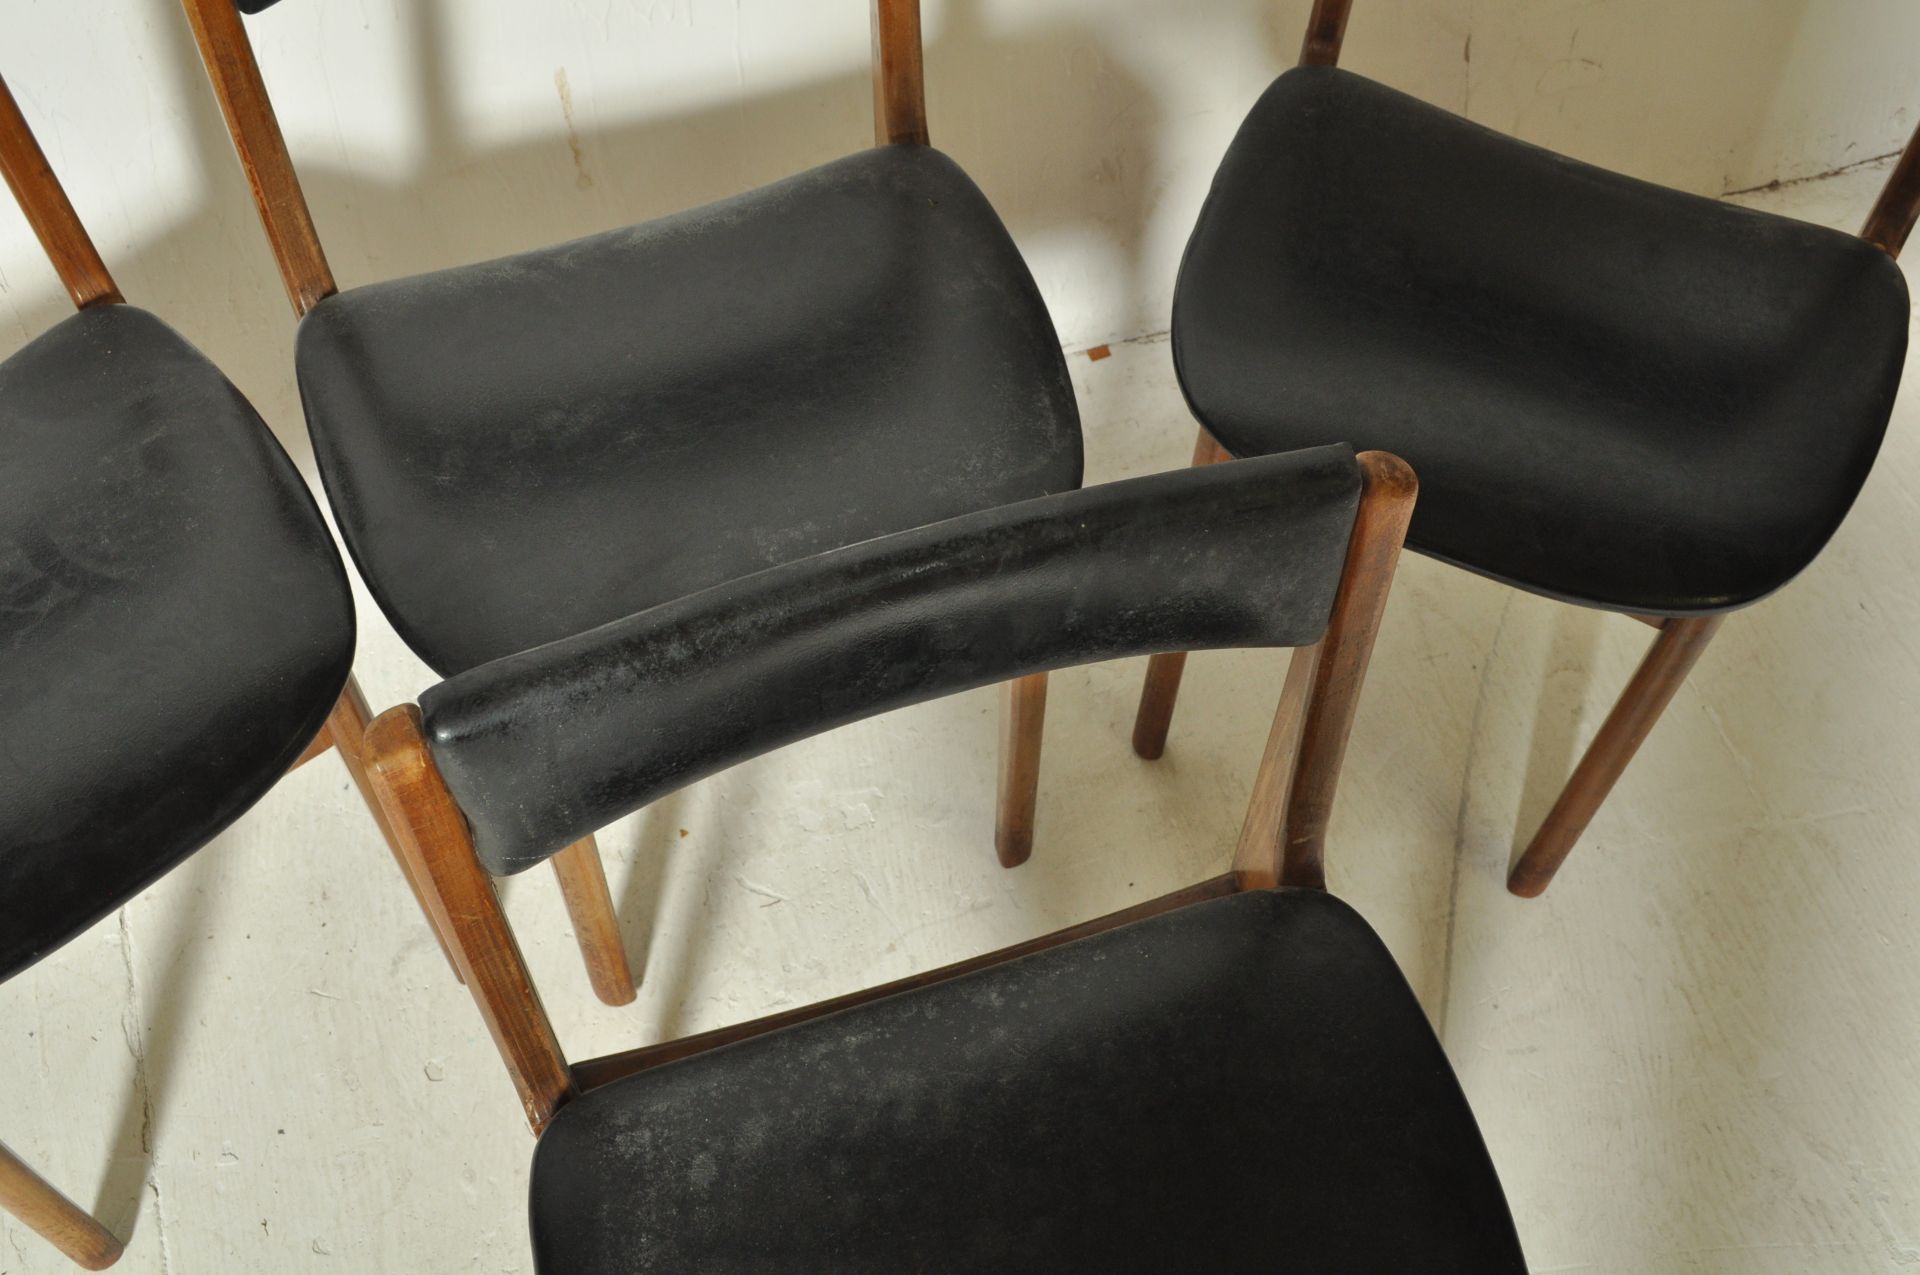 FOUR DANISH INSPIRED TEAK WOOD AND BLACK VINYL DINING CHAIRS - Image 4 of 6